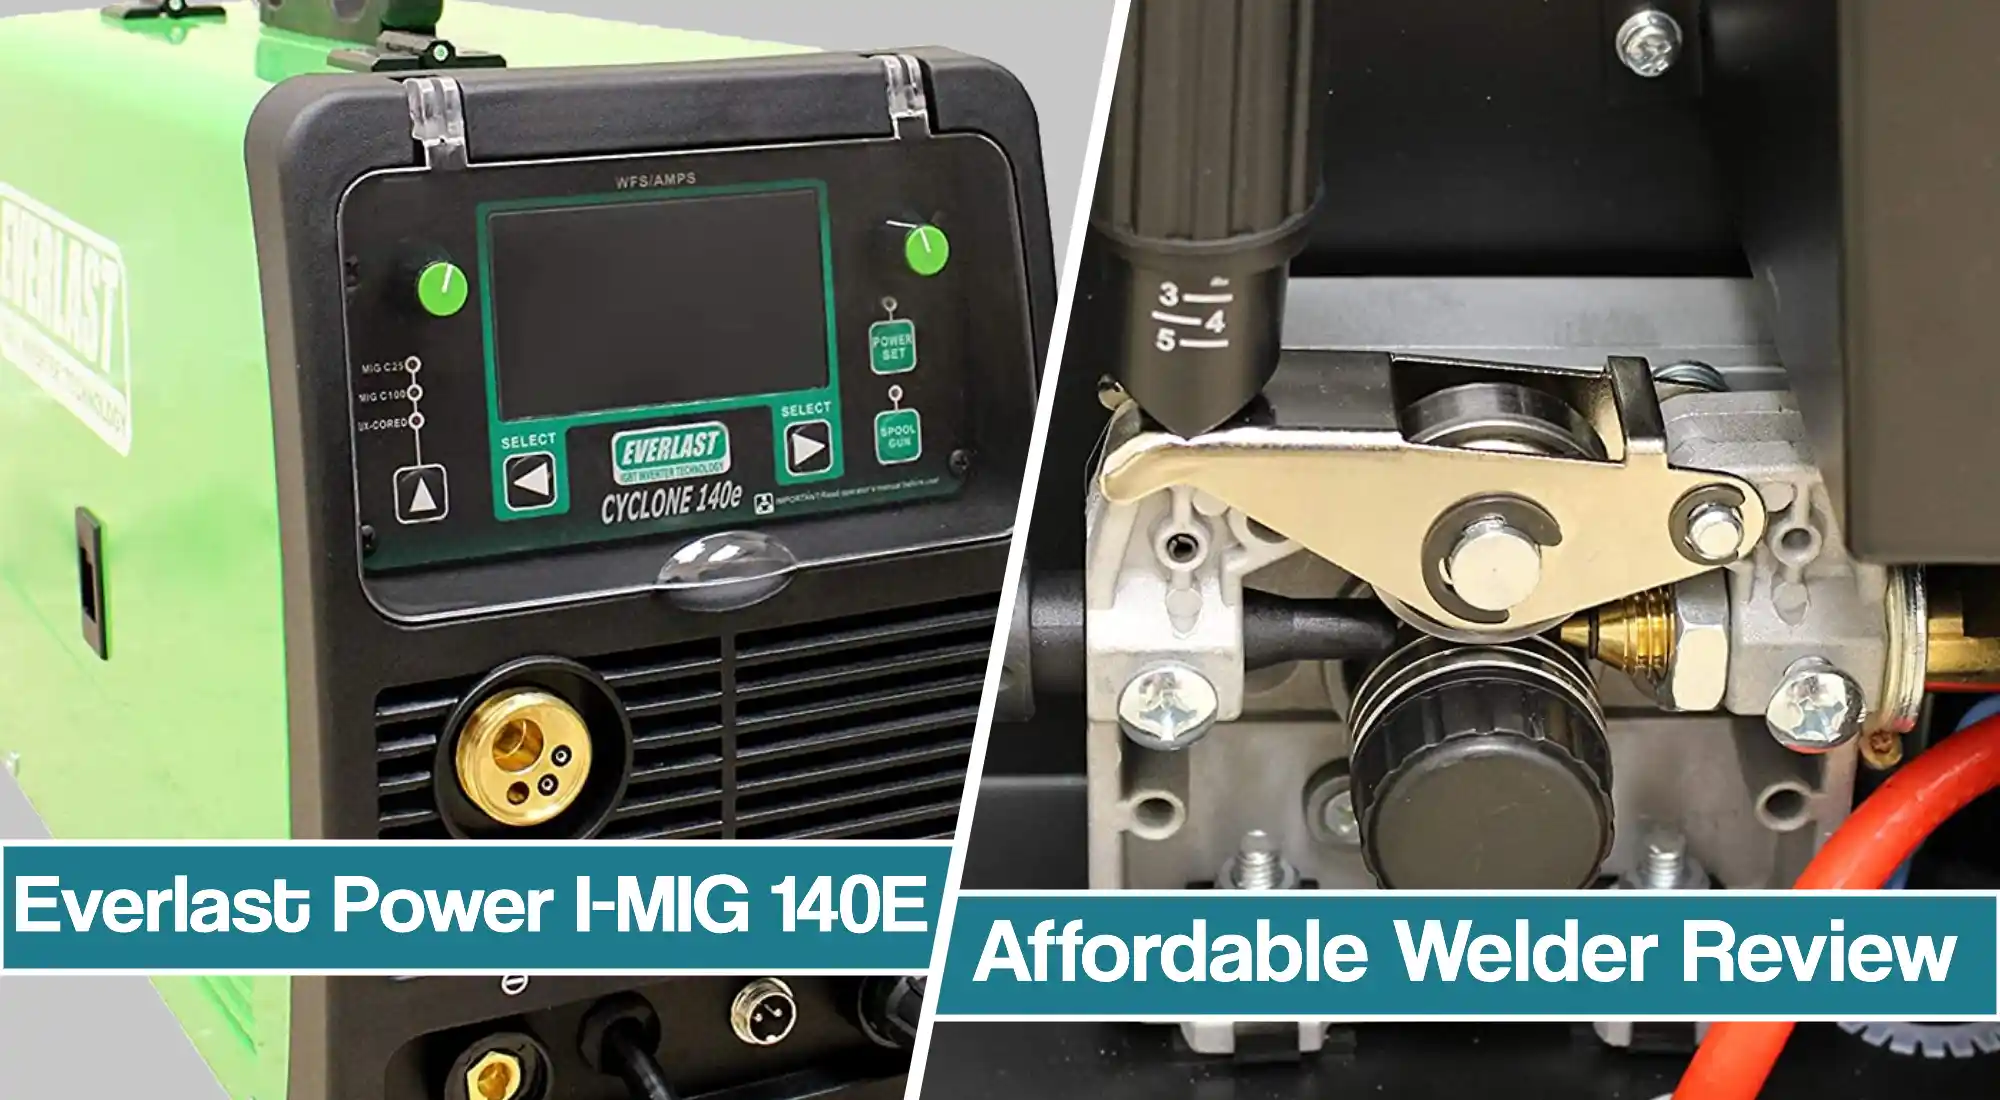 Everlast Power i-MIG 140E MIG welder Review – Key Features of This Affordable Beginner-Friendly Welder